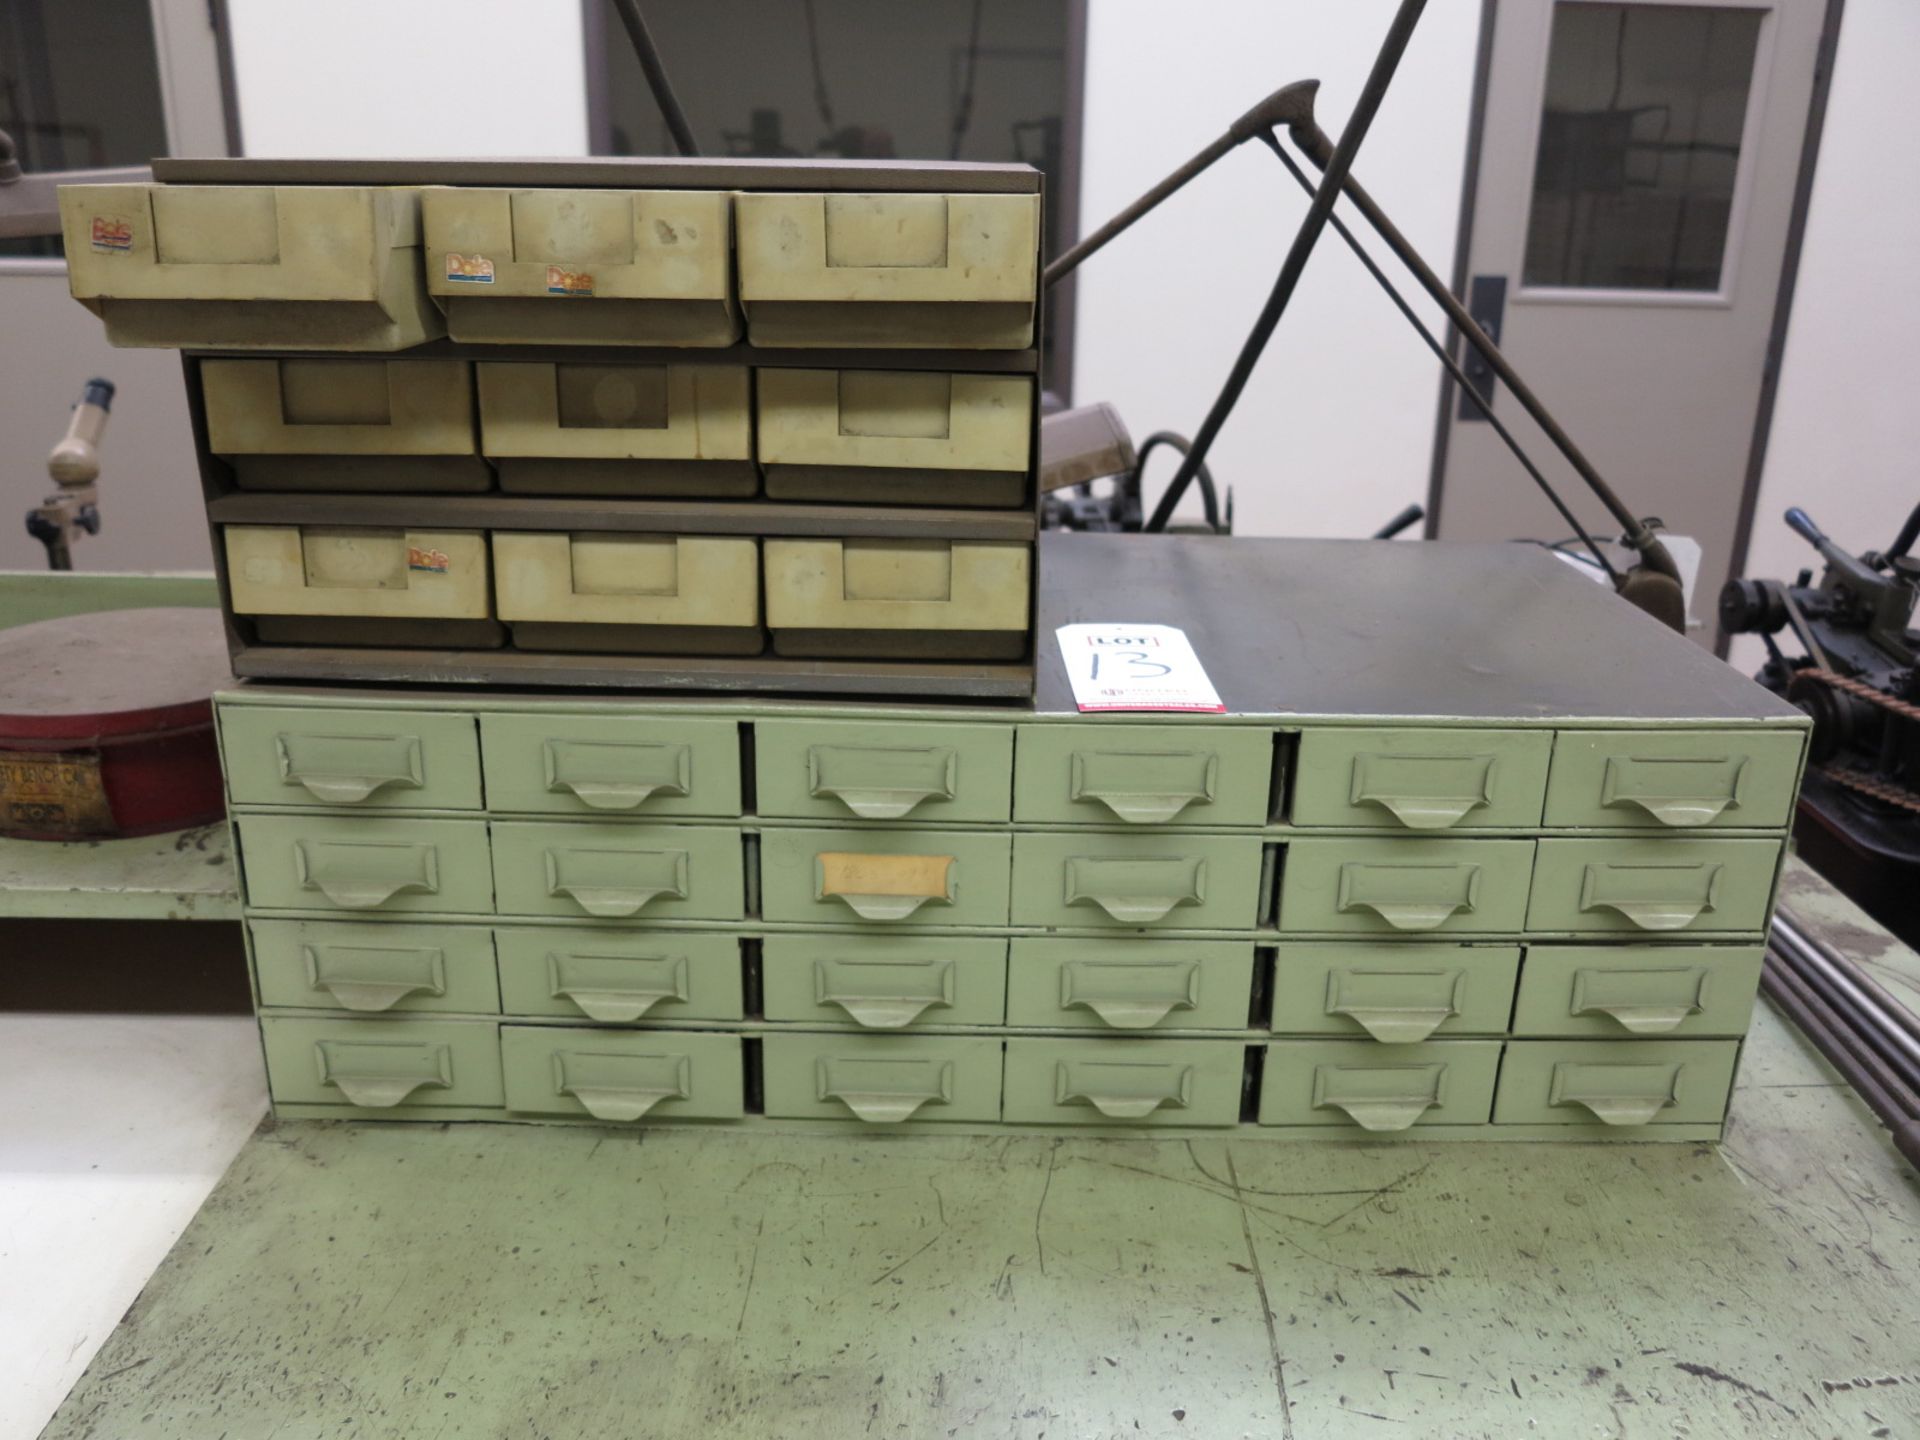 LOT - (1) 9-DRAWER AND (1) 24-DRAWER SMALL PARTS DESKTOP CABINET